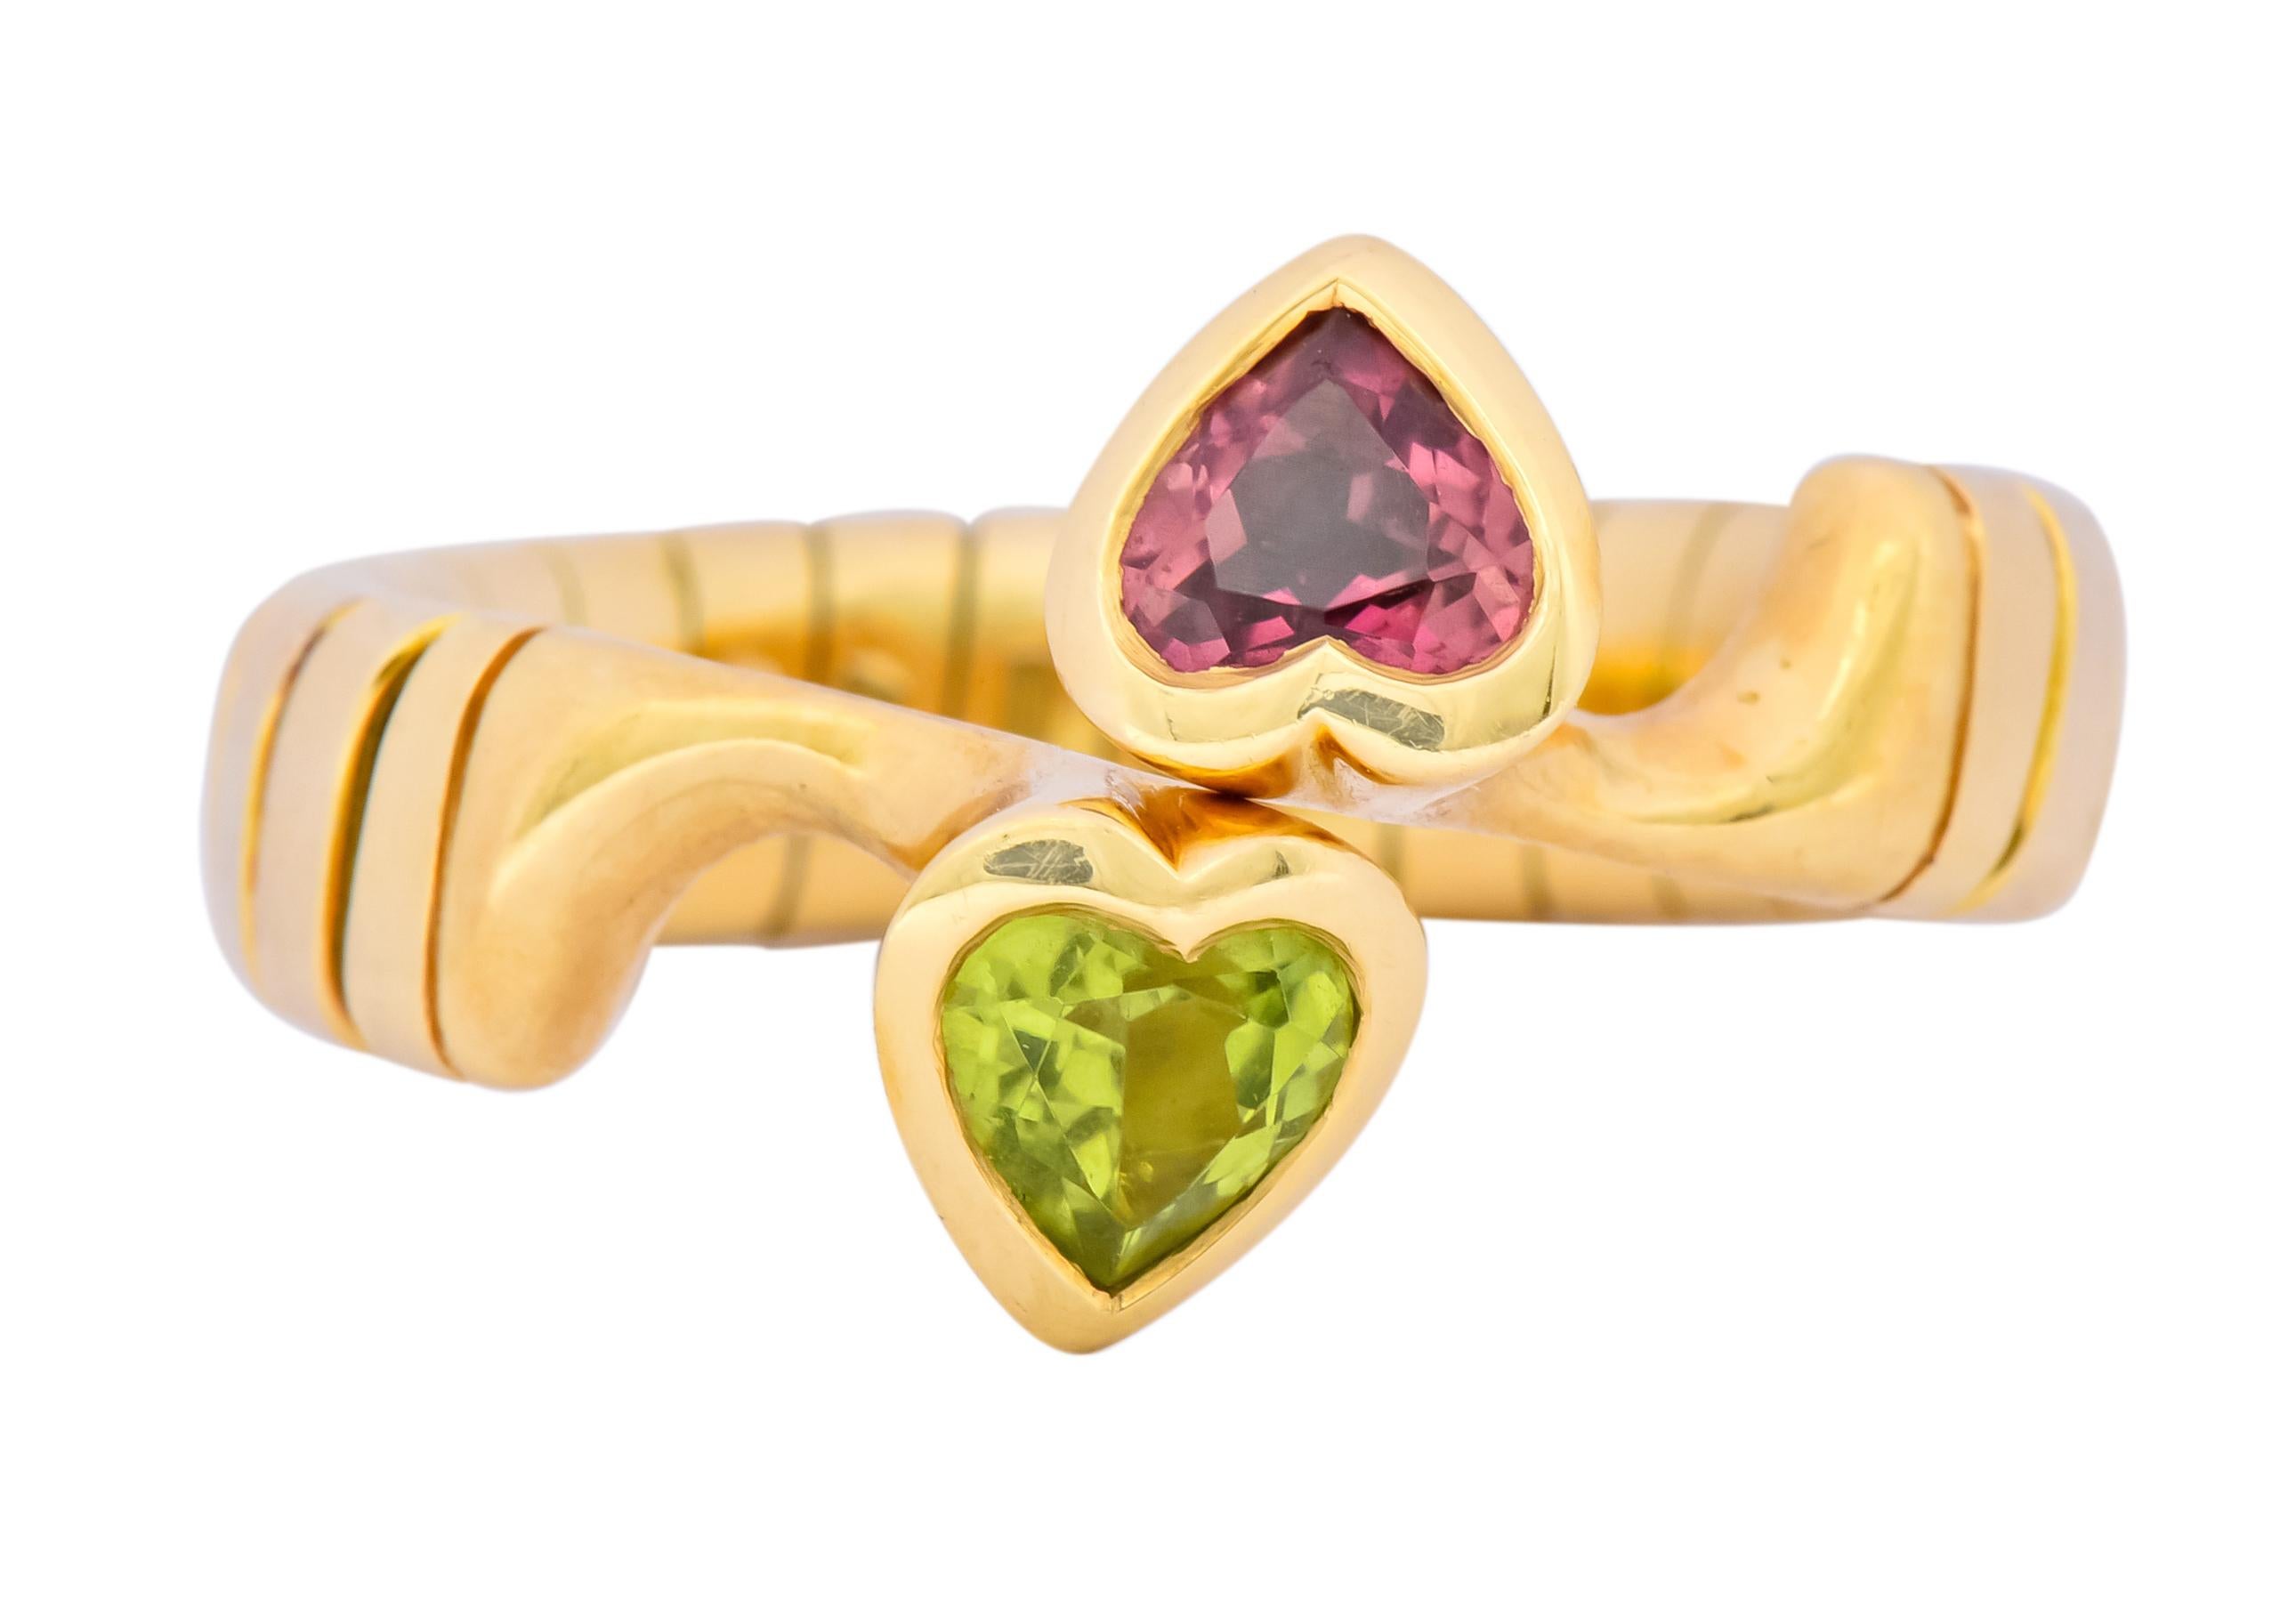 Centering heart cut pink tourmaline and peridot, weighing approximately 1.50 carats total and very saturated color

Each bezel set in a polished gold surround in a bypass style ring

Completed by tubogas shank

Fully signed Bvlgari with Italian